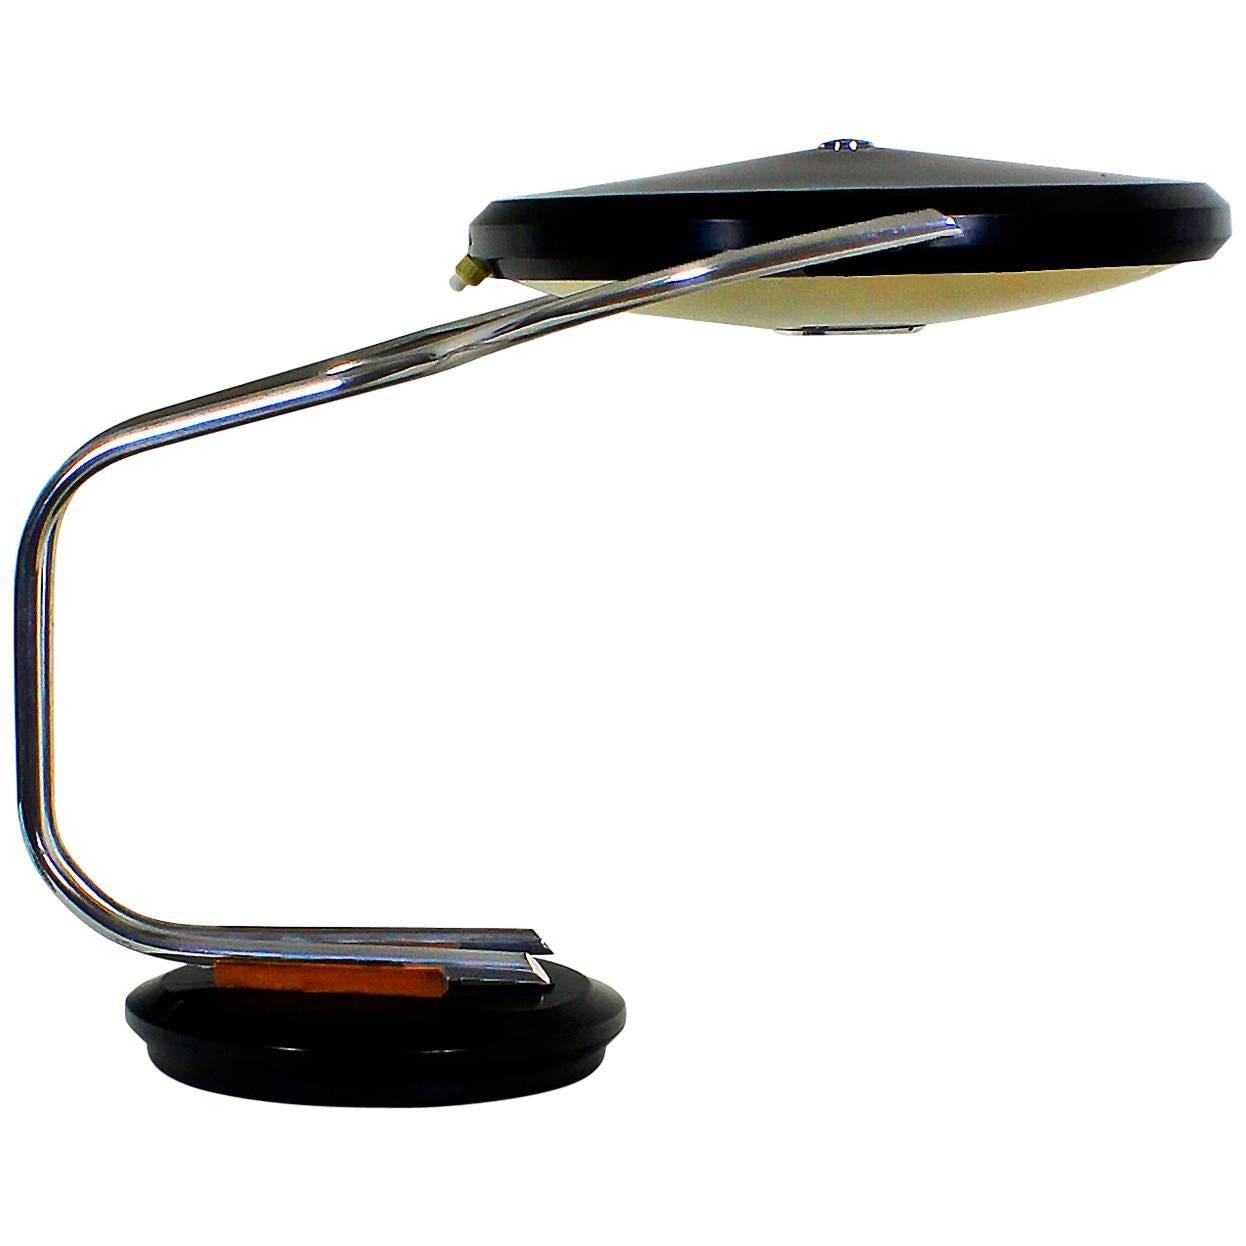 1960s Chrome-Plated Metal Desk Lamp by Fase, Spain